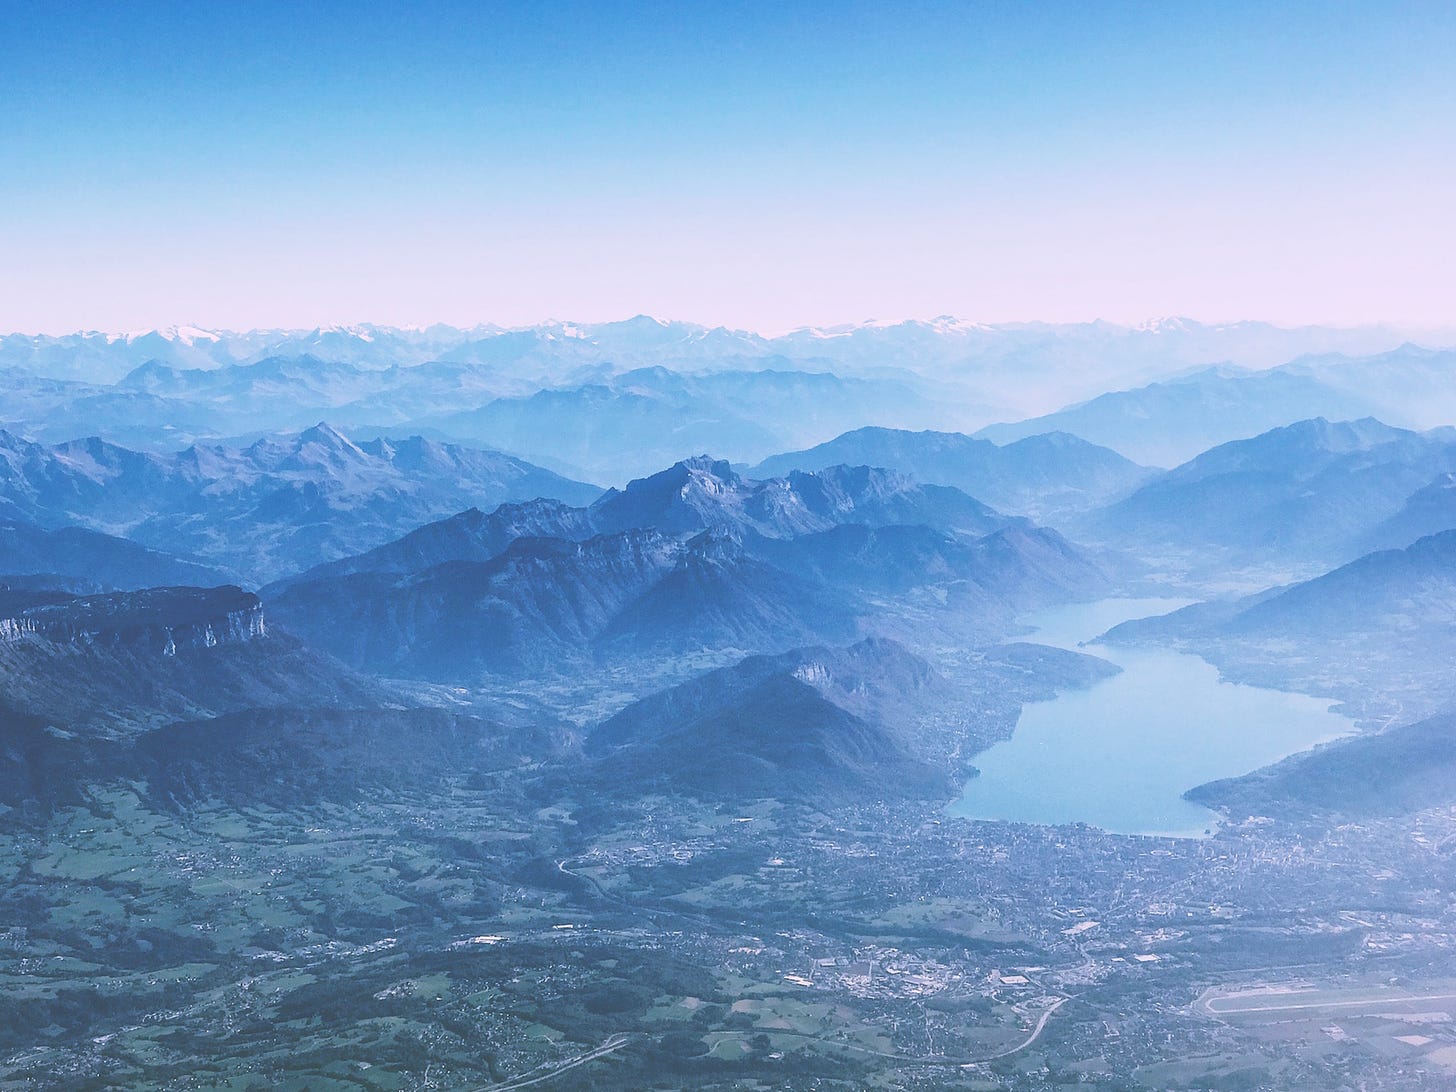 The flight factor: flying in and out of Switzerland